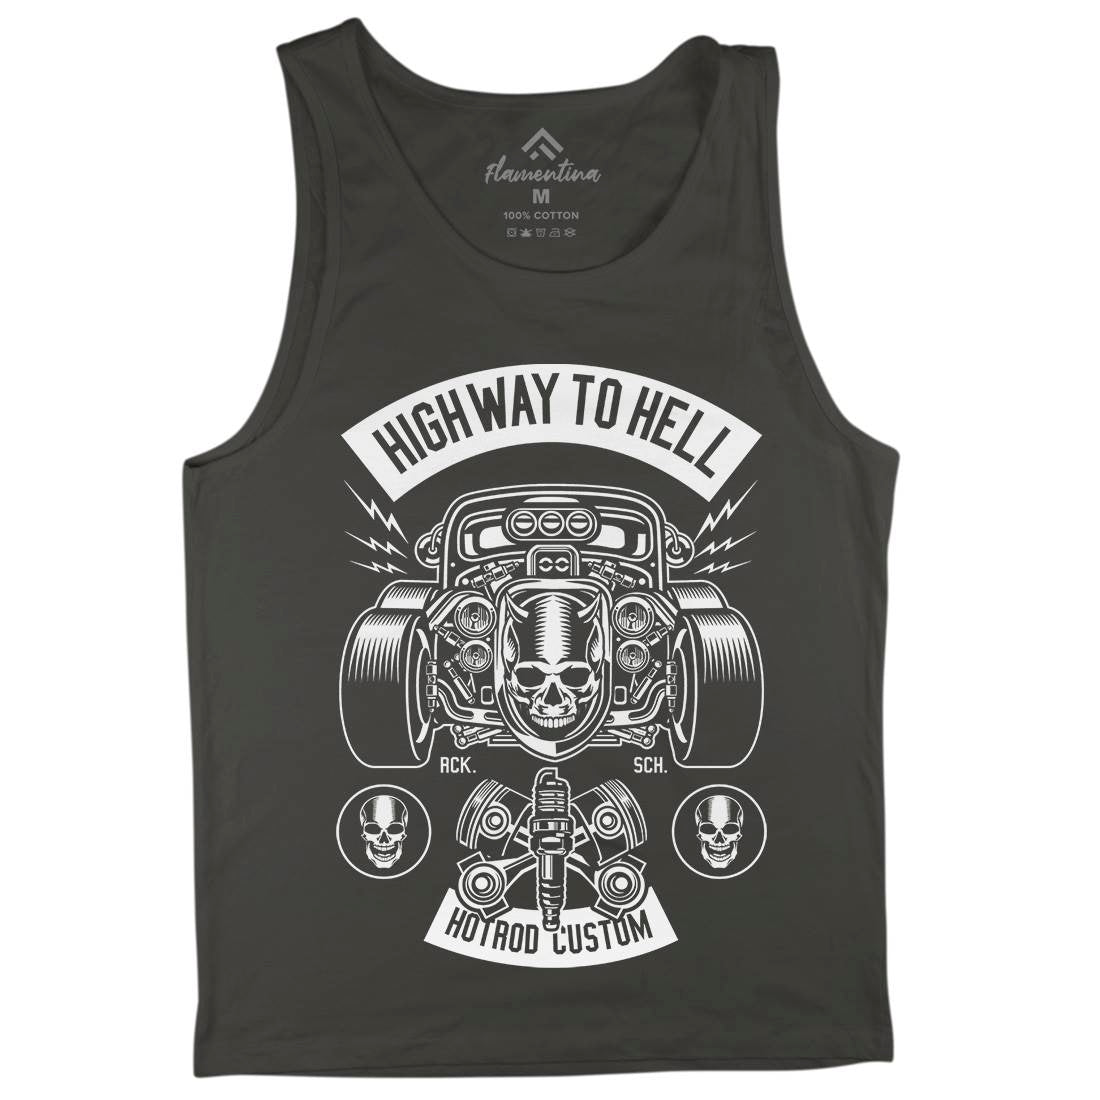 Highway To Hell Mens Tank Top Vest Cars B556